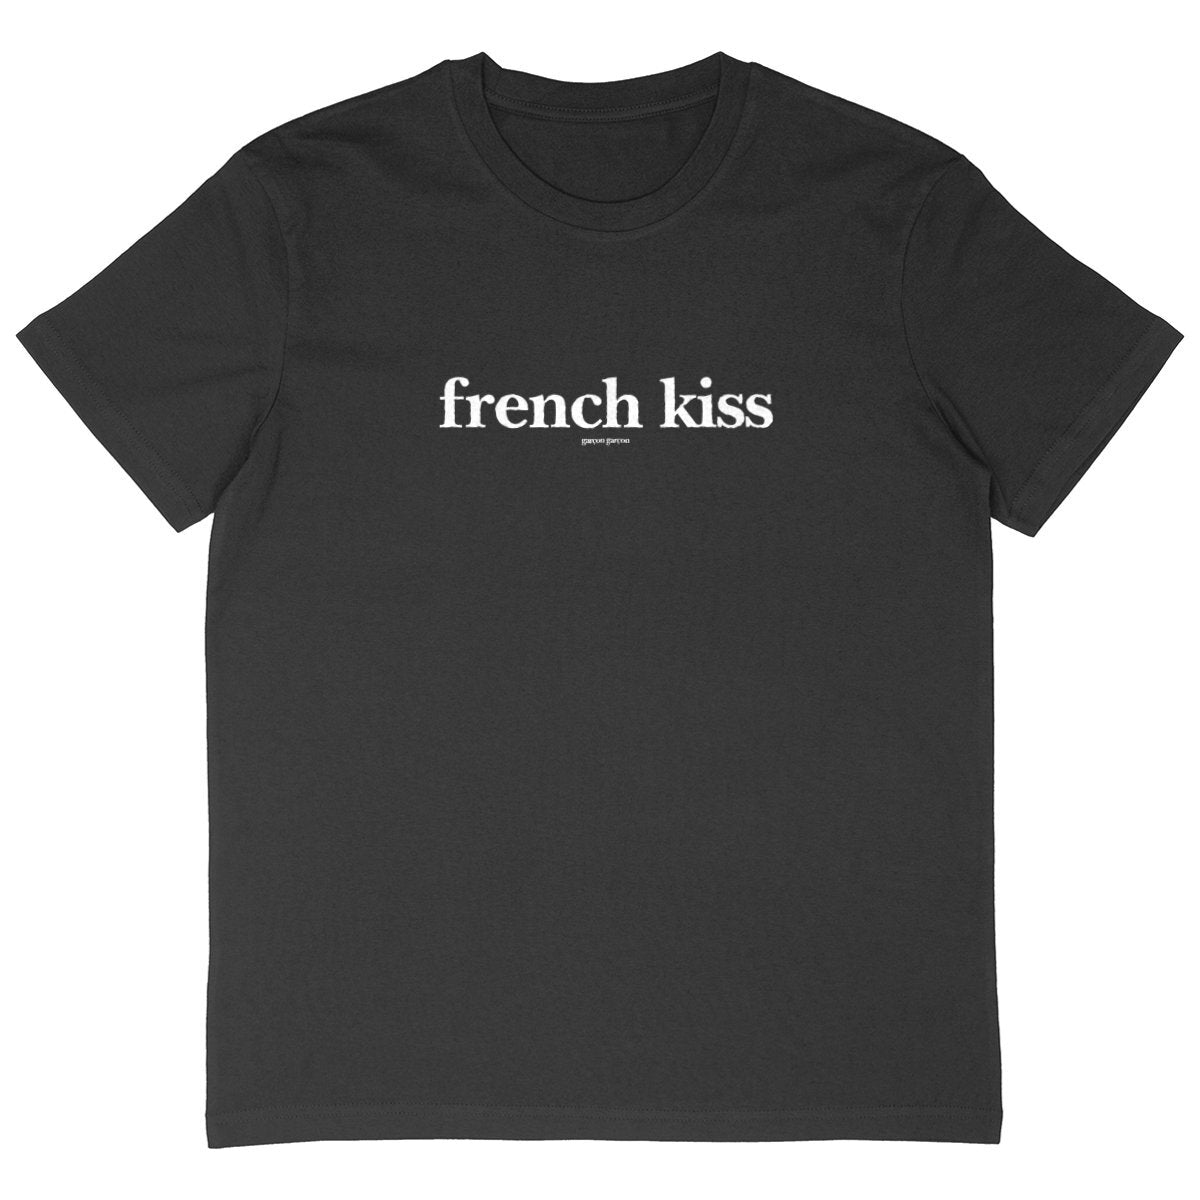 french kiss BLACK OVERSIZED TEE; BLACK tee oversized.garçon garçon tee oversize BLACK. Dive into the essence of Parisian cool with this oversized tee. The subtle 'garçon garçon' signature whispers a chic narrative, offering a slice of the city's famed elegance. Perfect for those who speak style with simplicity.